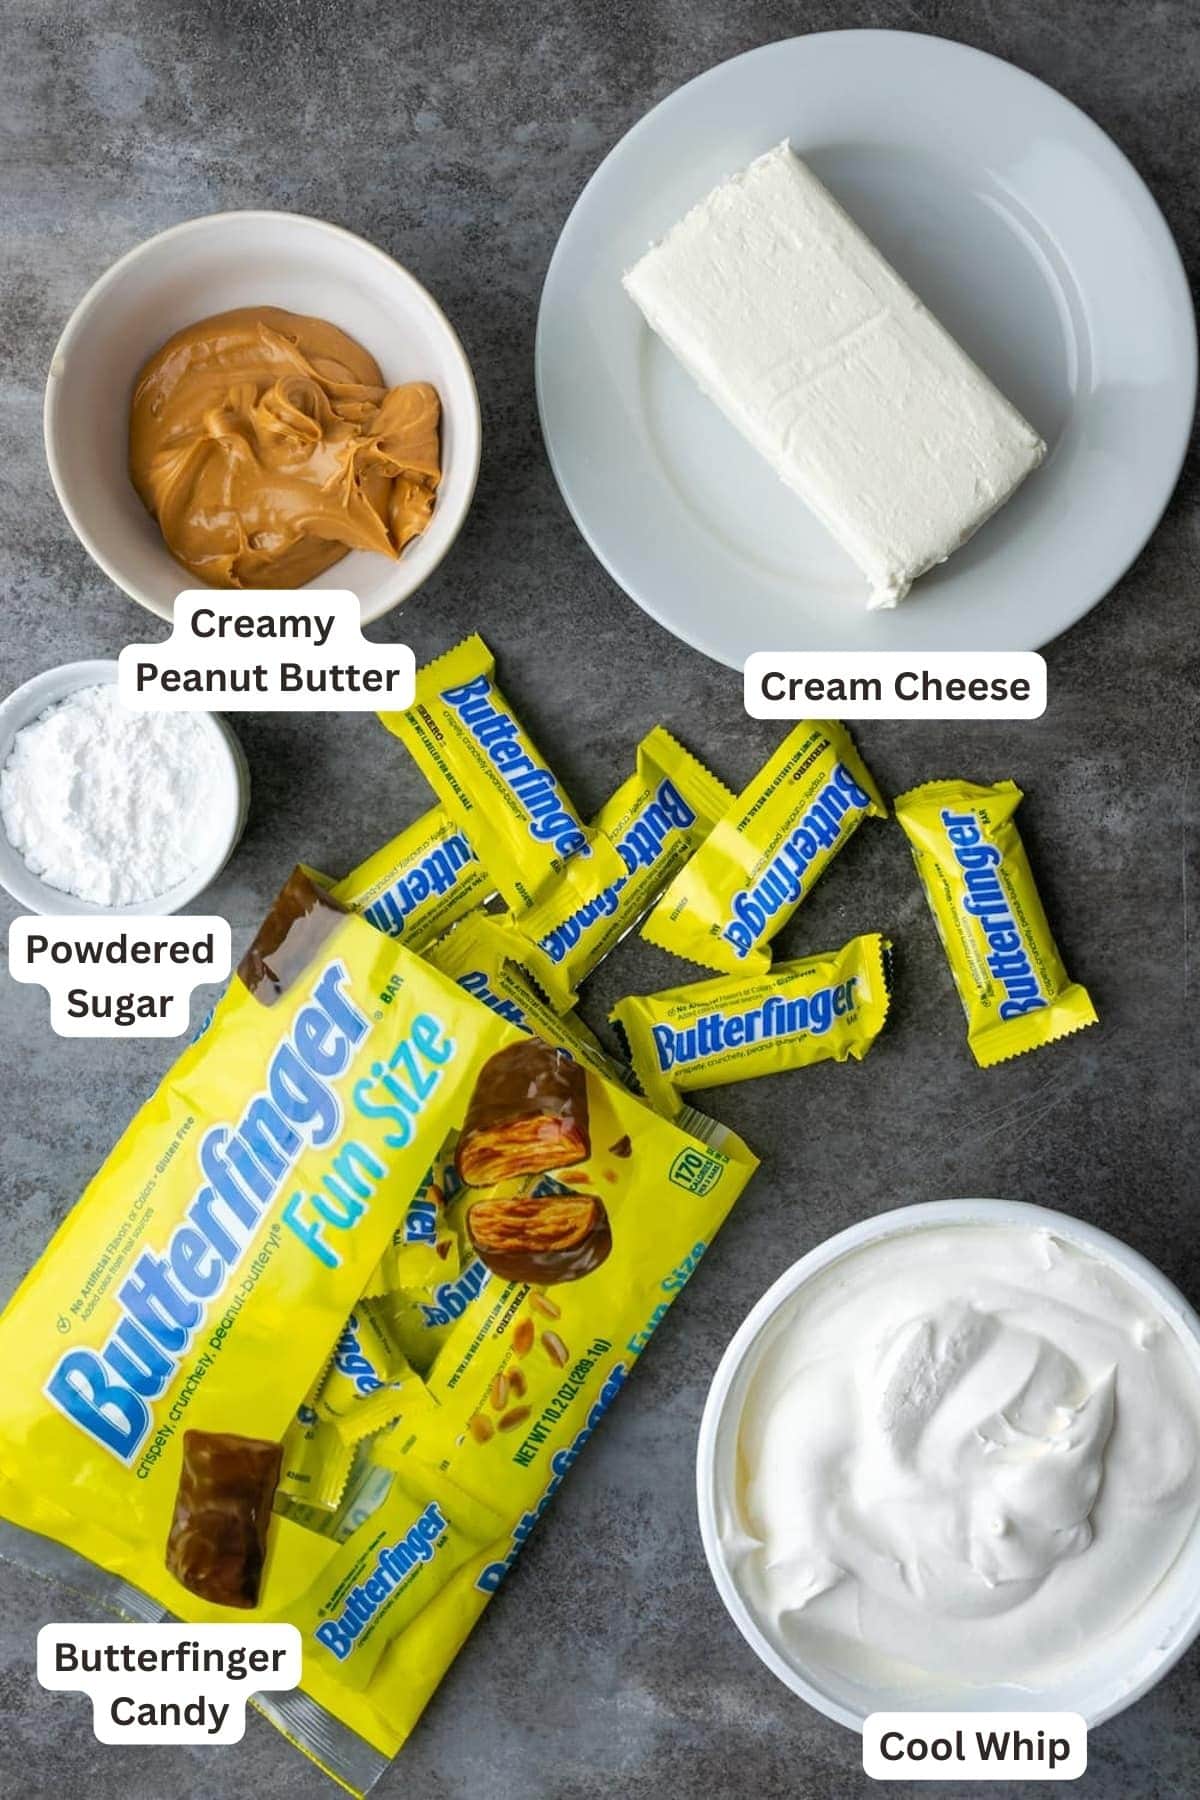 Ingredients for Butterfinger Pie filling.